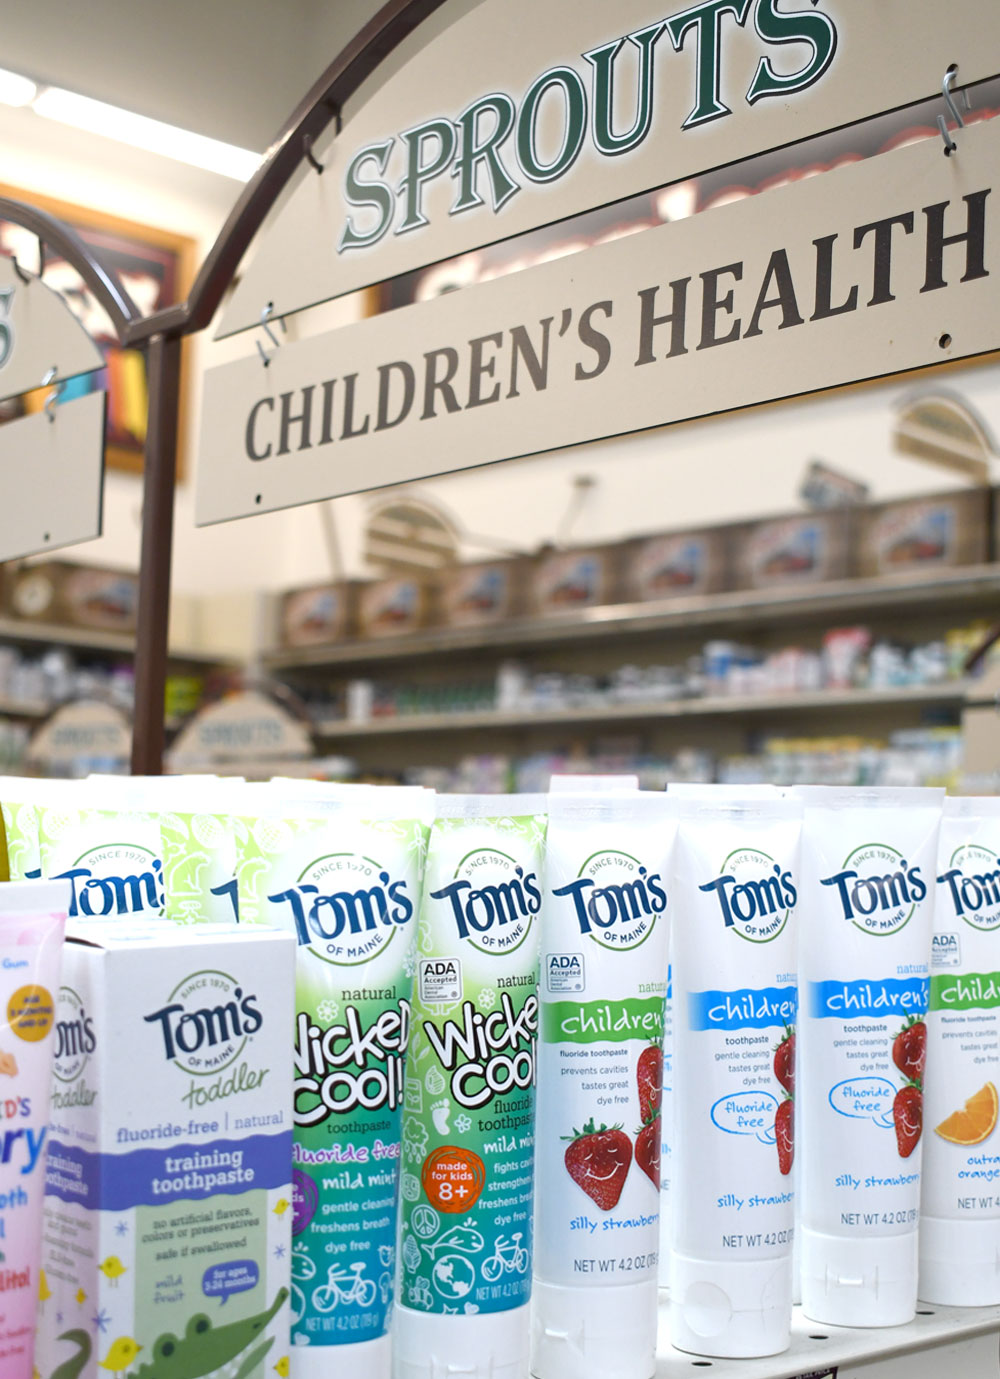 Sprouts Farmer's Market Tom's of Maine Wicked Cool! fluoride toothpaste